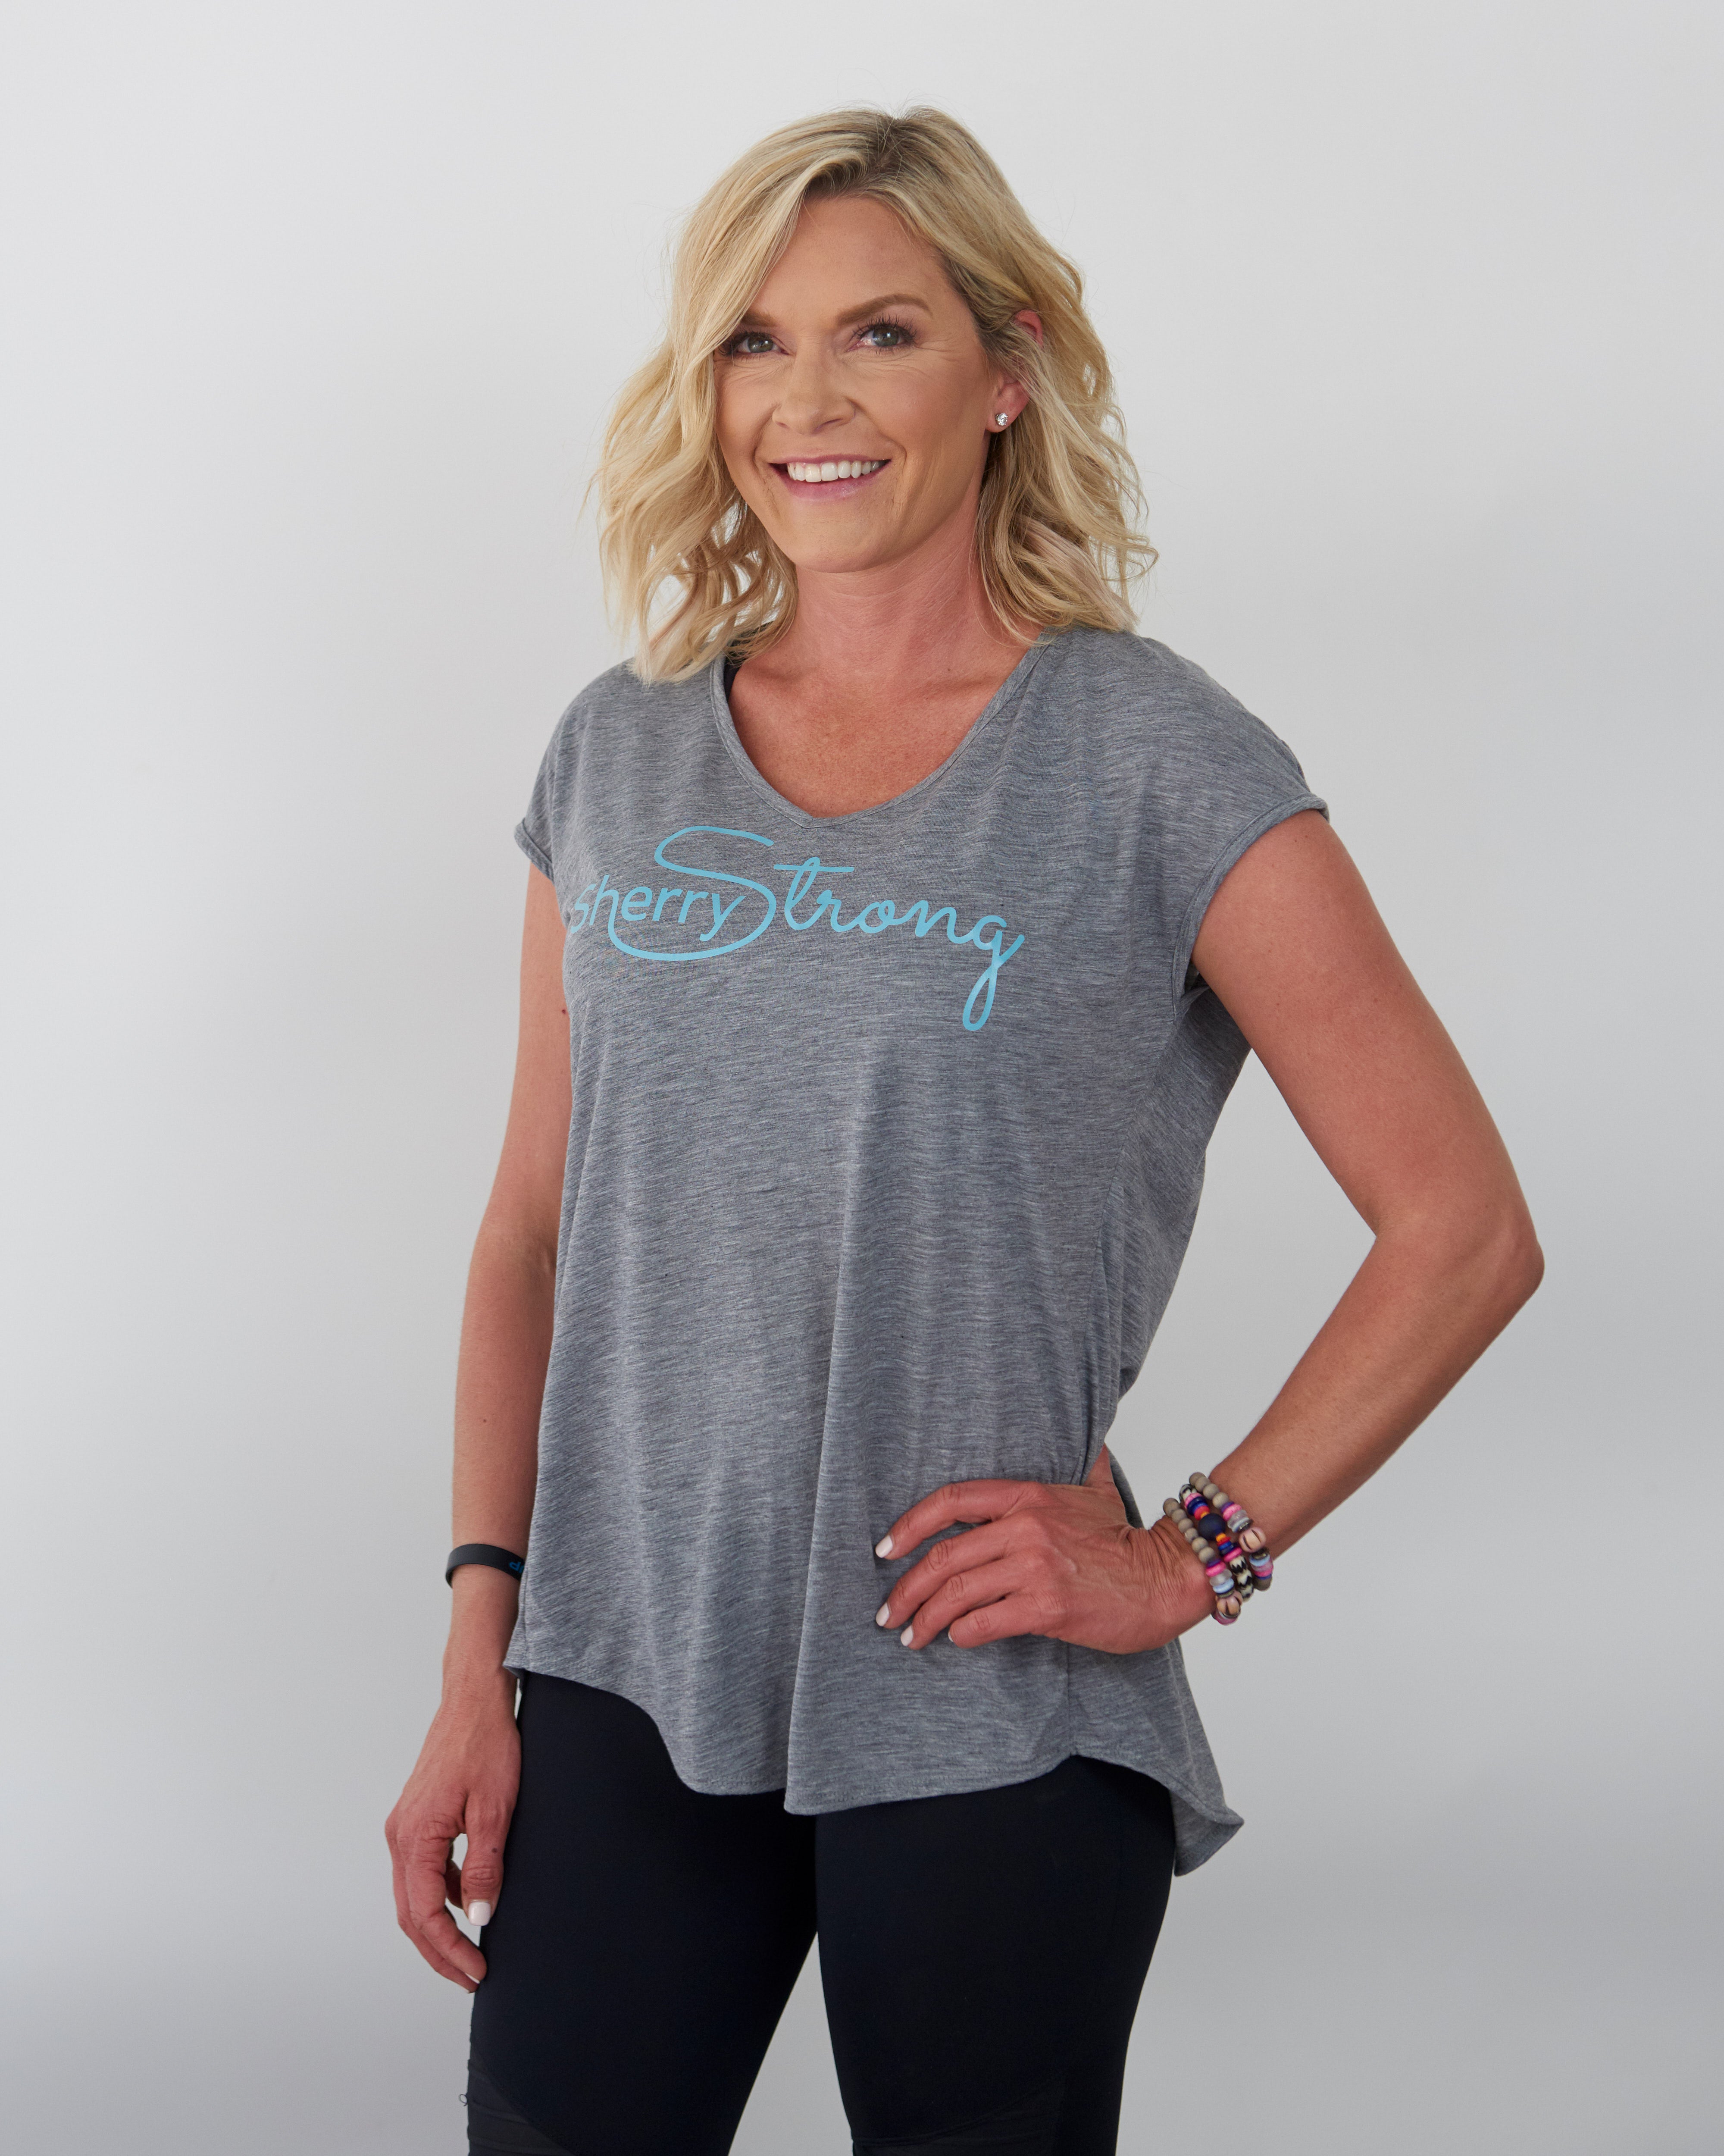 About SherryStrong – SHERRY STRONG FOUNDATION